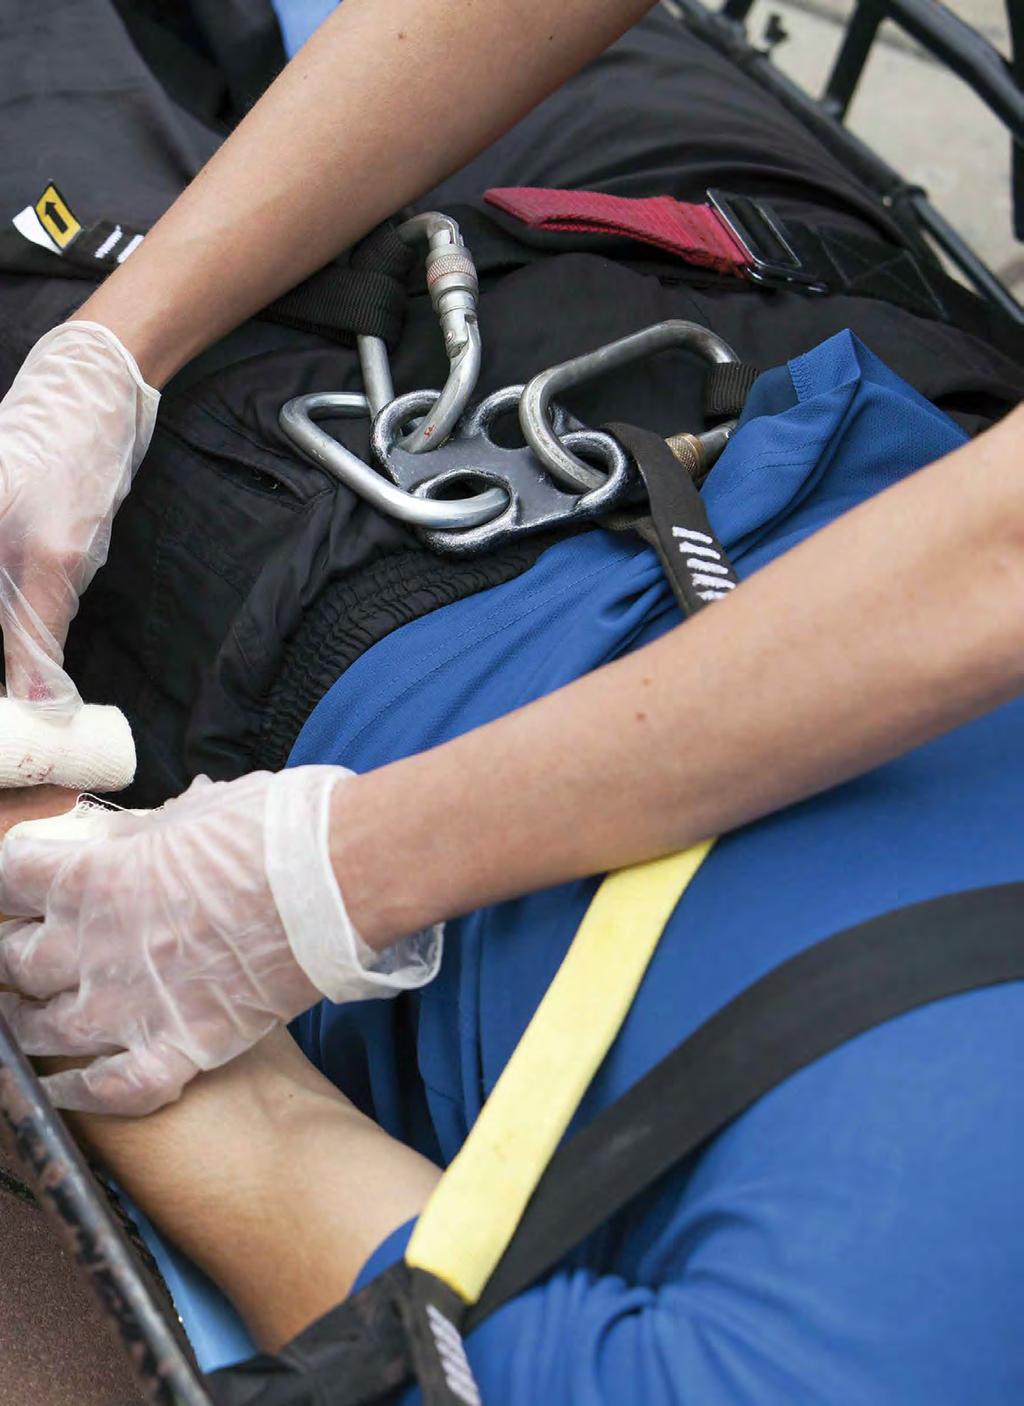 Providing appropriate administering and rescue equipment such as immobilisation, resuscitation and defibrillation can reduce the risk of permanent injury